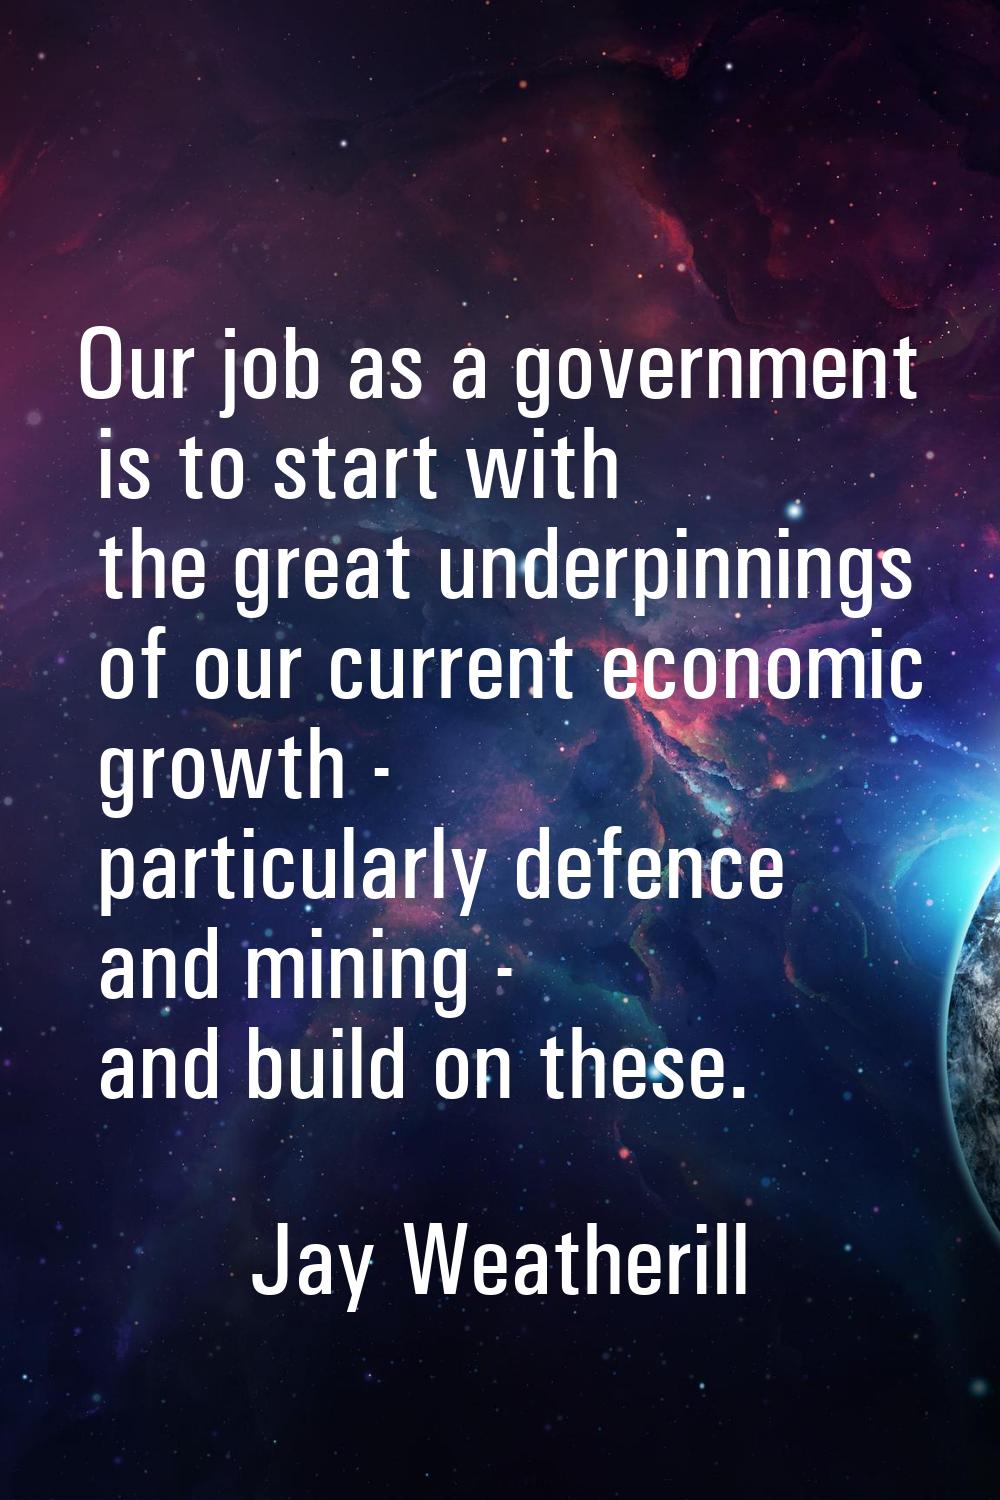 Our job as a government is to start with the great underpinnings of our current economic growth - p